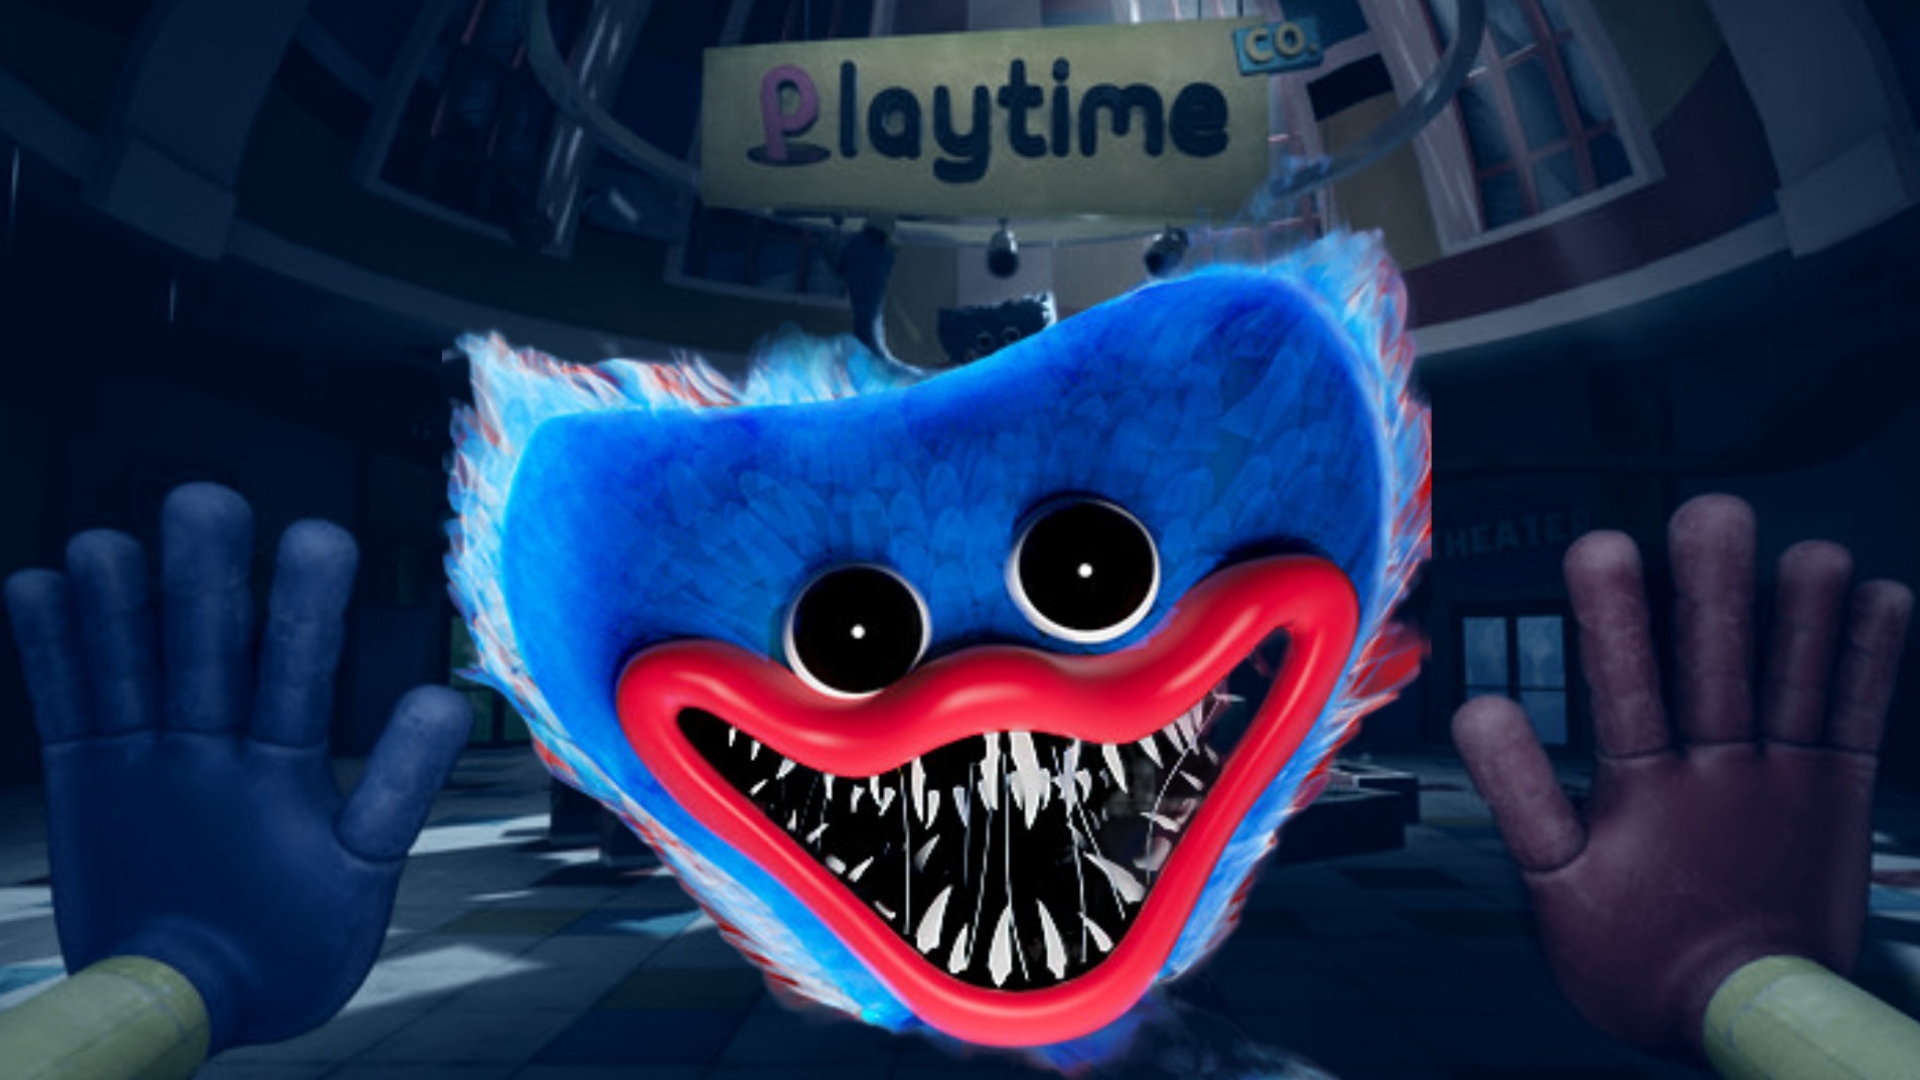 Poppy Playtime Chapter 1 - Players' Reviews